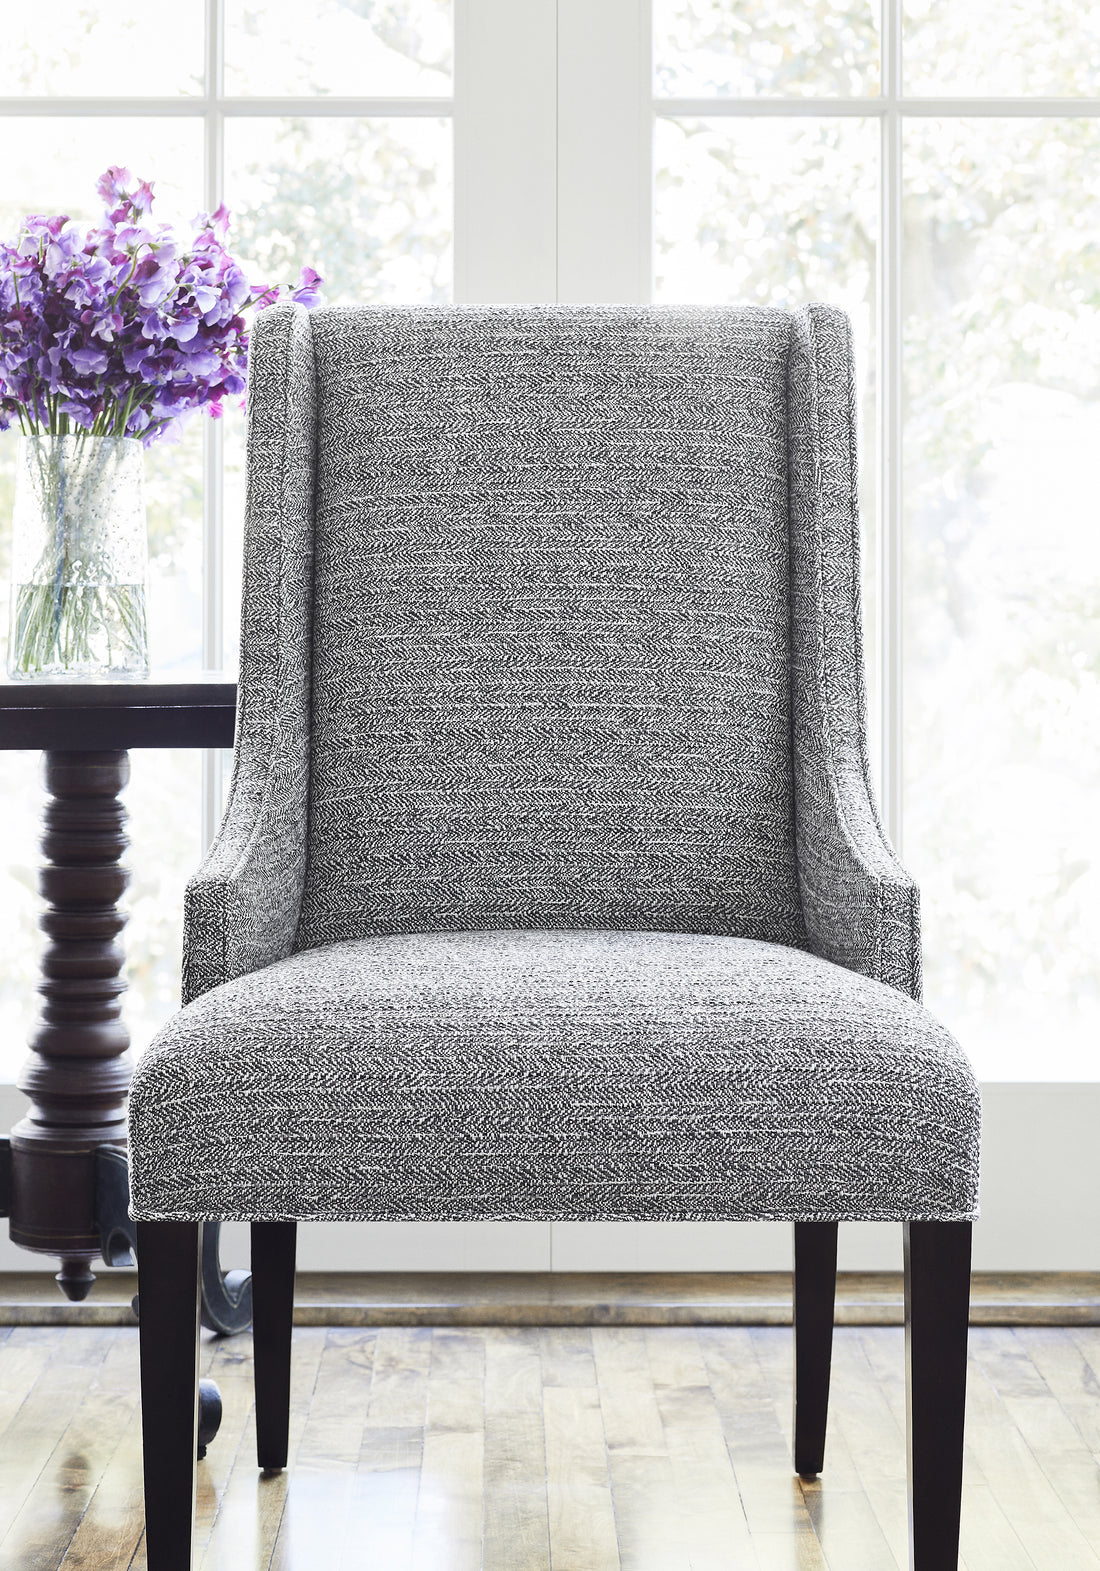 Hudson Dining Chair in Thibaut Elements woven fabric in Charcoal color - pattern number W75250